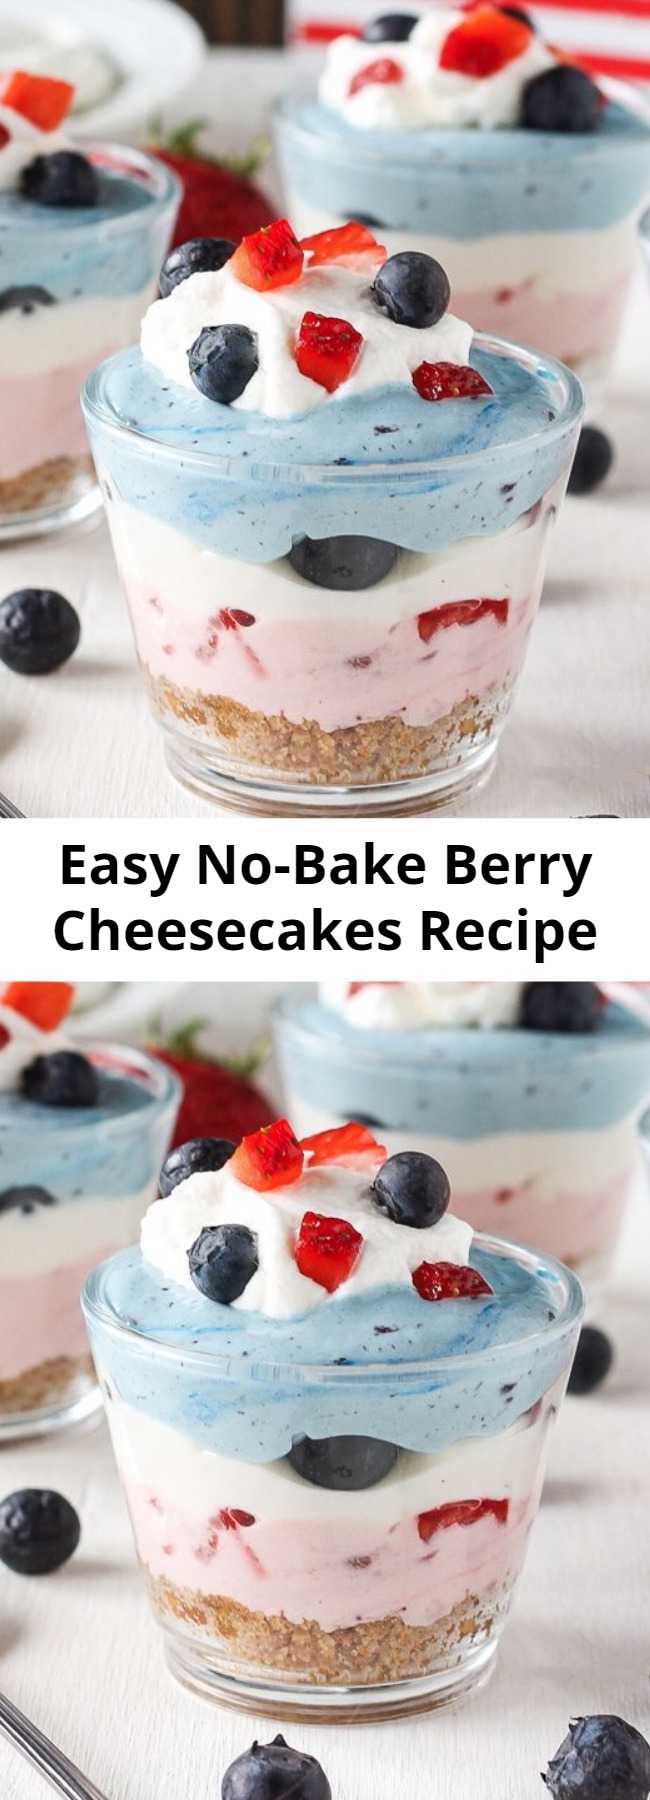 Easy No-Bake Berry Cheesecakes Recipe - You're plenty hot already. Make dessert without turning on the oven. Serving them in little dishes means everyone gets their own, and who doesn't love to dig their spoon into their own cute mini cheesecake?!